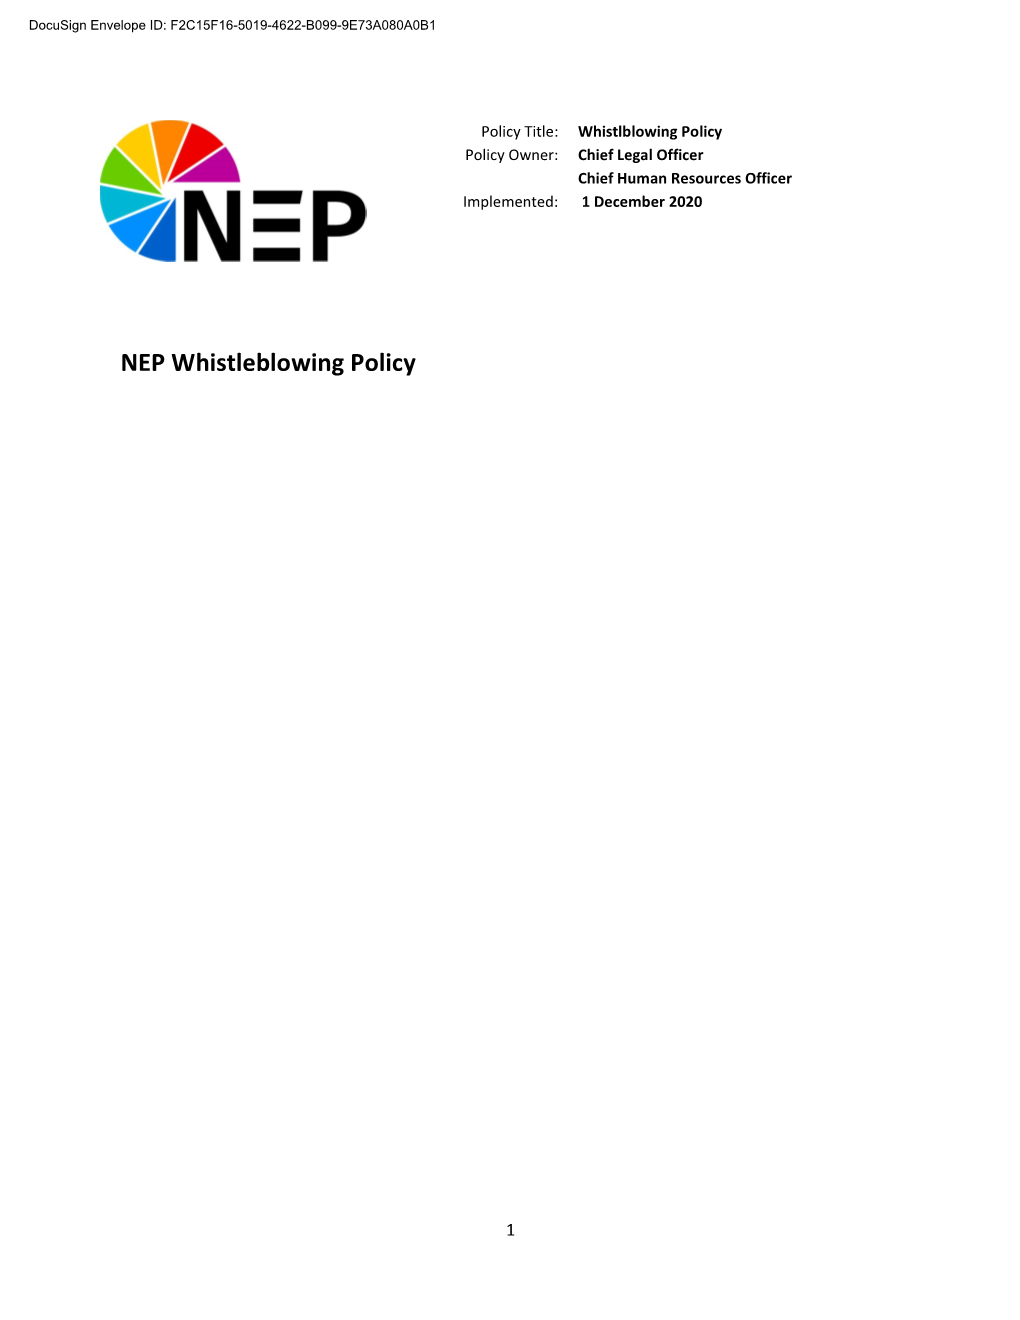 NEP Whistleblowing Policy